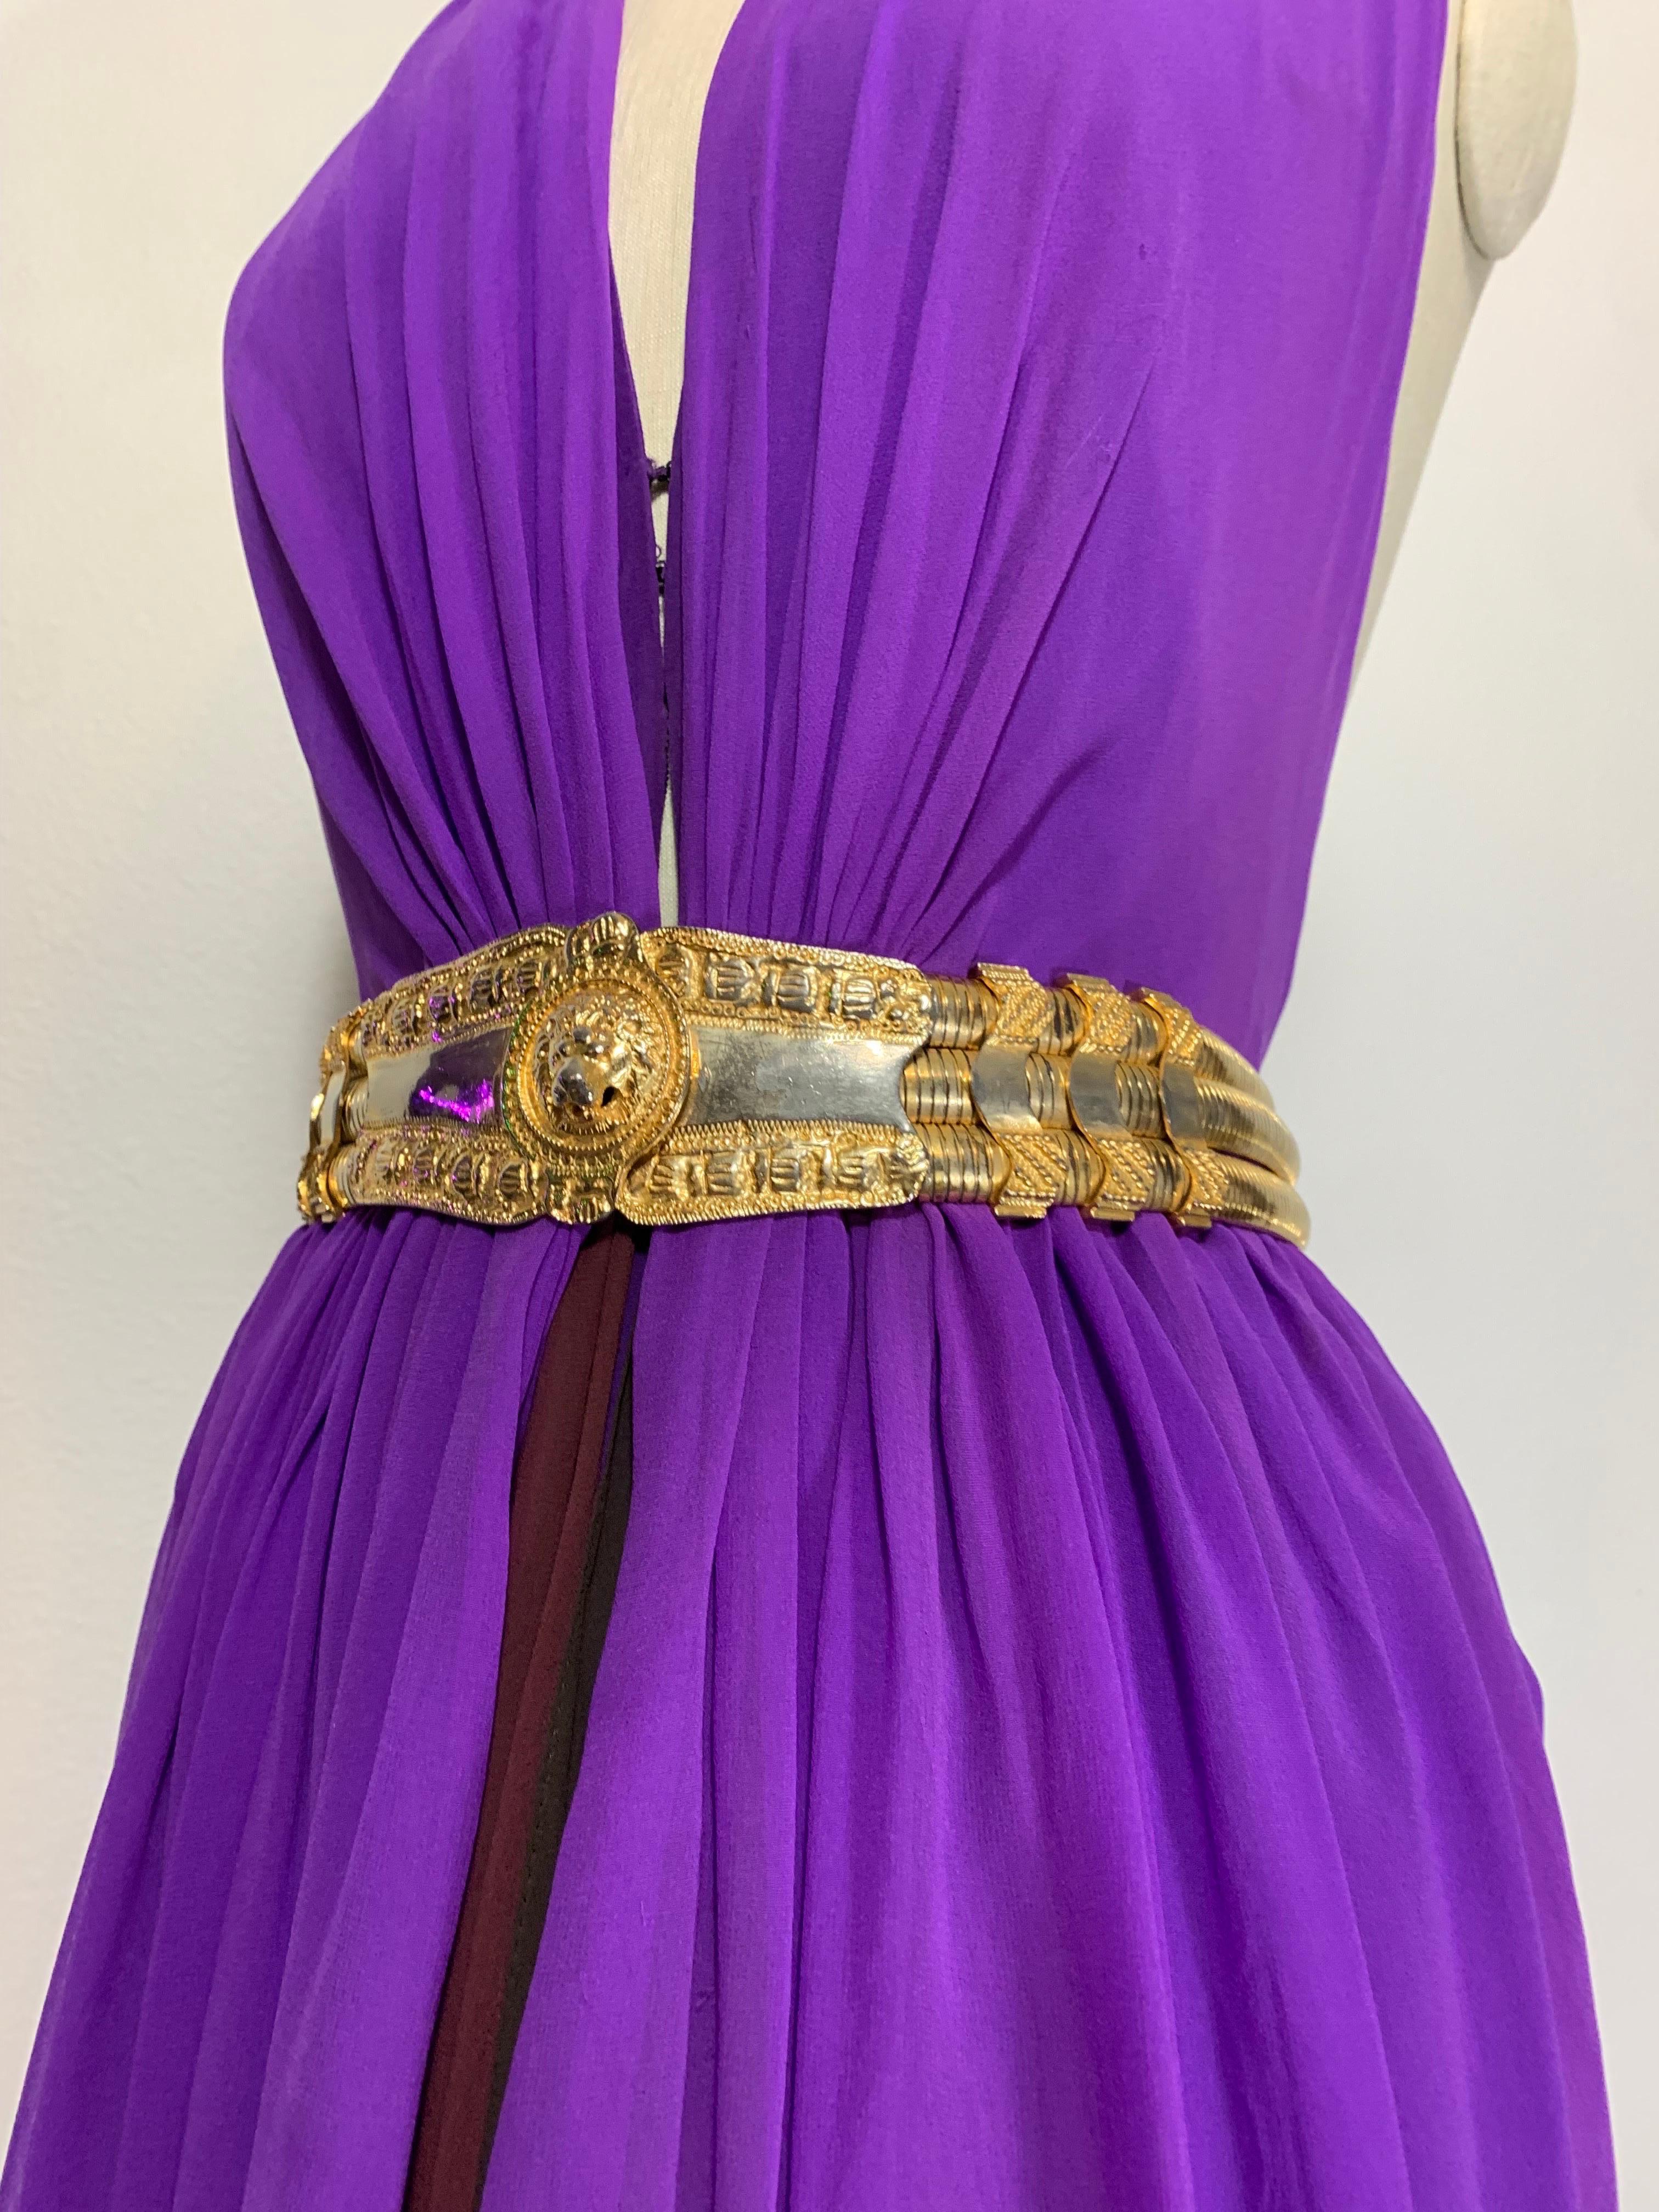 1970s Bill Blass 4-Layer Color-Blocked Purple, Brown and Rust Silk Chiffon Goddess Gown w Tiered  Scalloped Hem: Halter-styling with plunging low back. Hook and eye, zipper front closure and an included Judith Leiber gold stretch belt with lion head